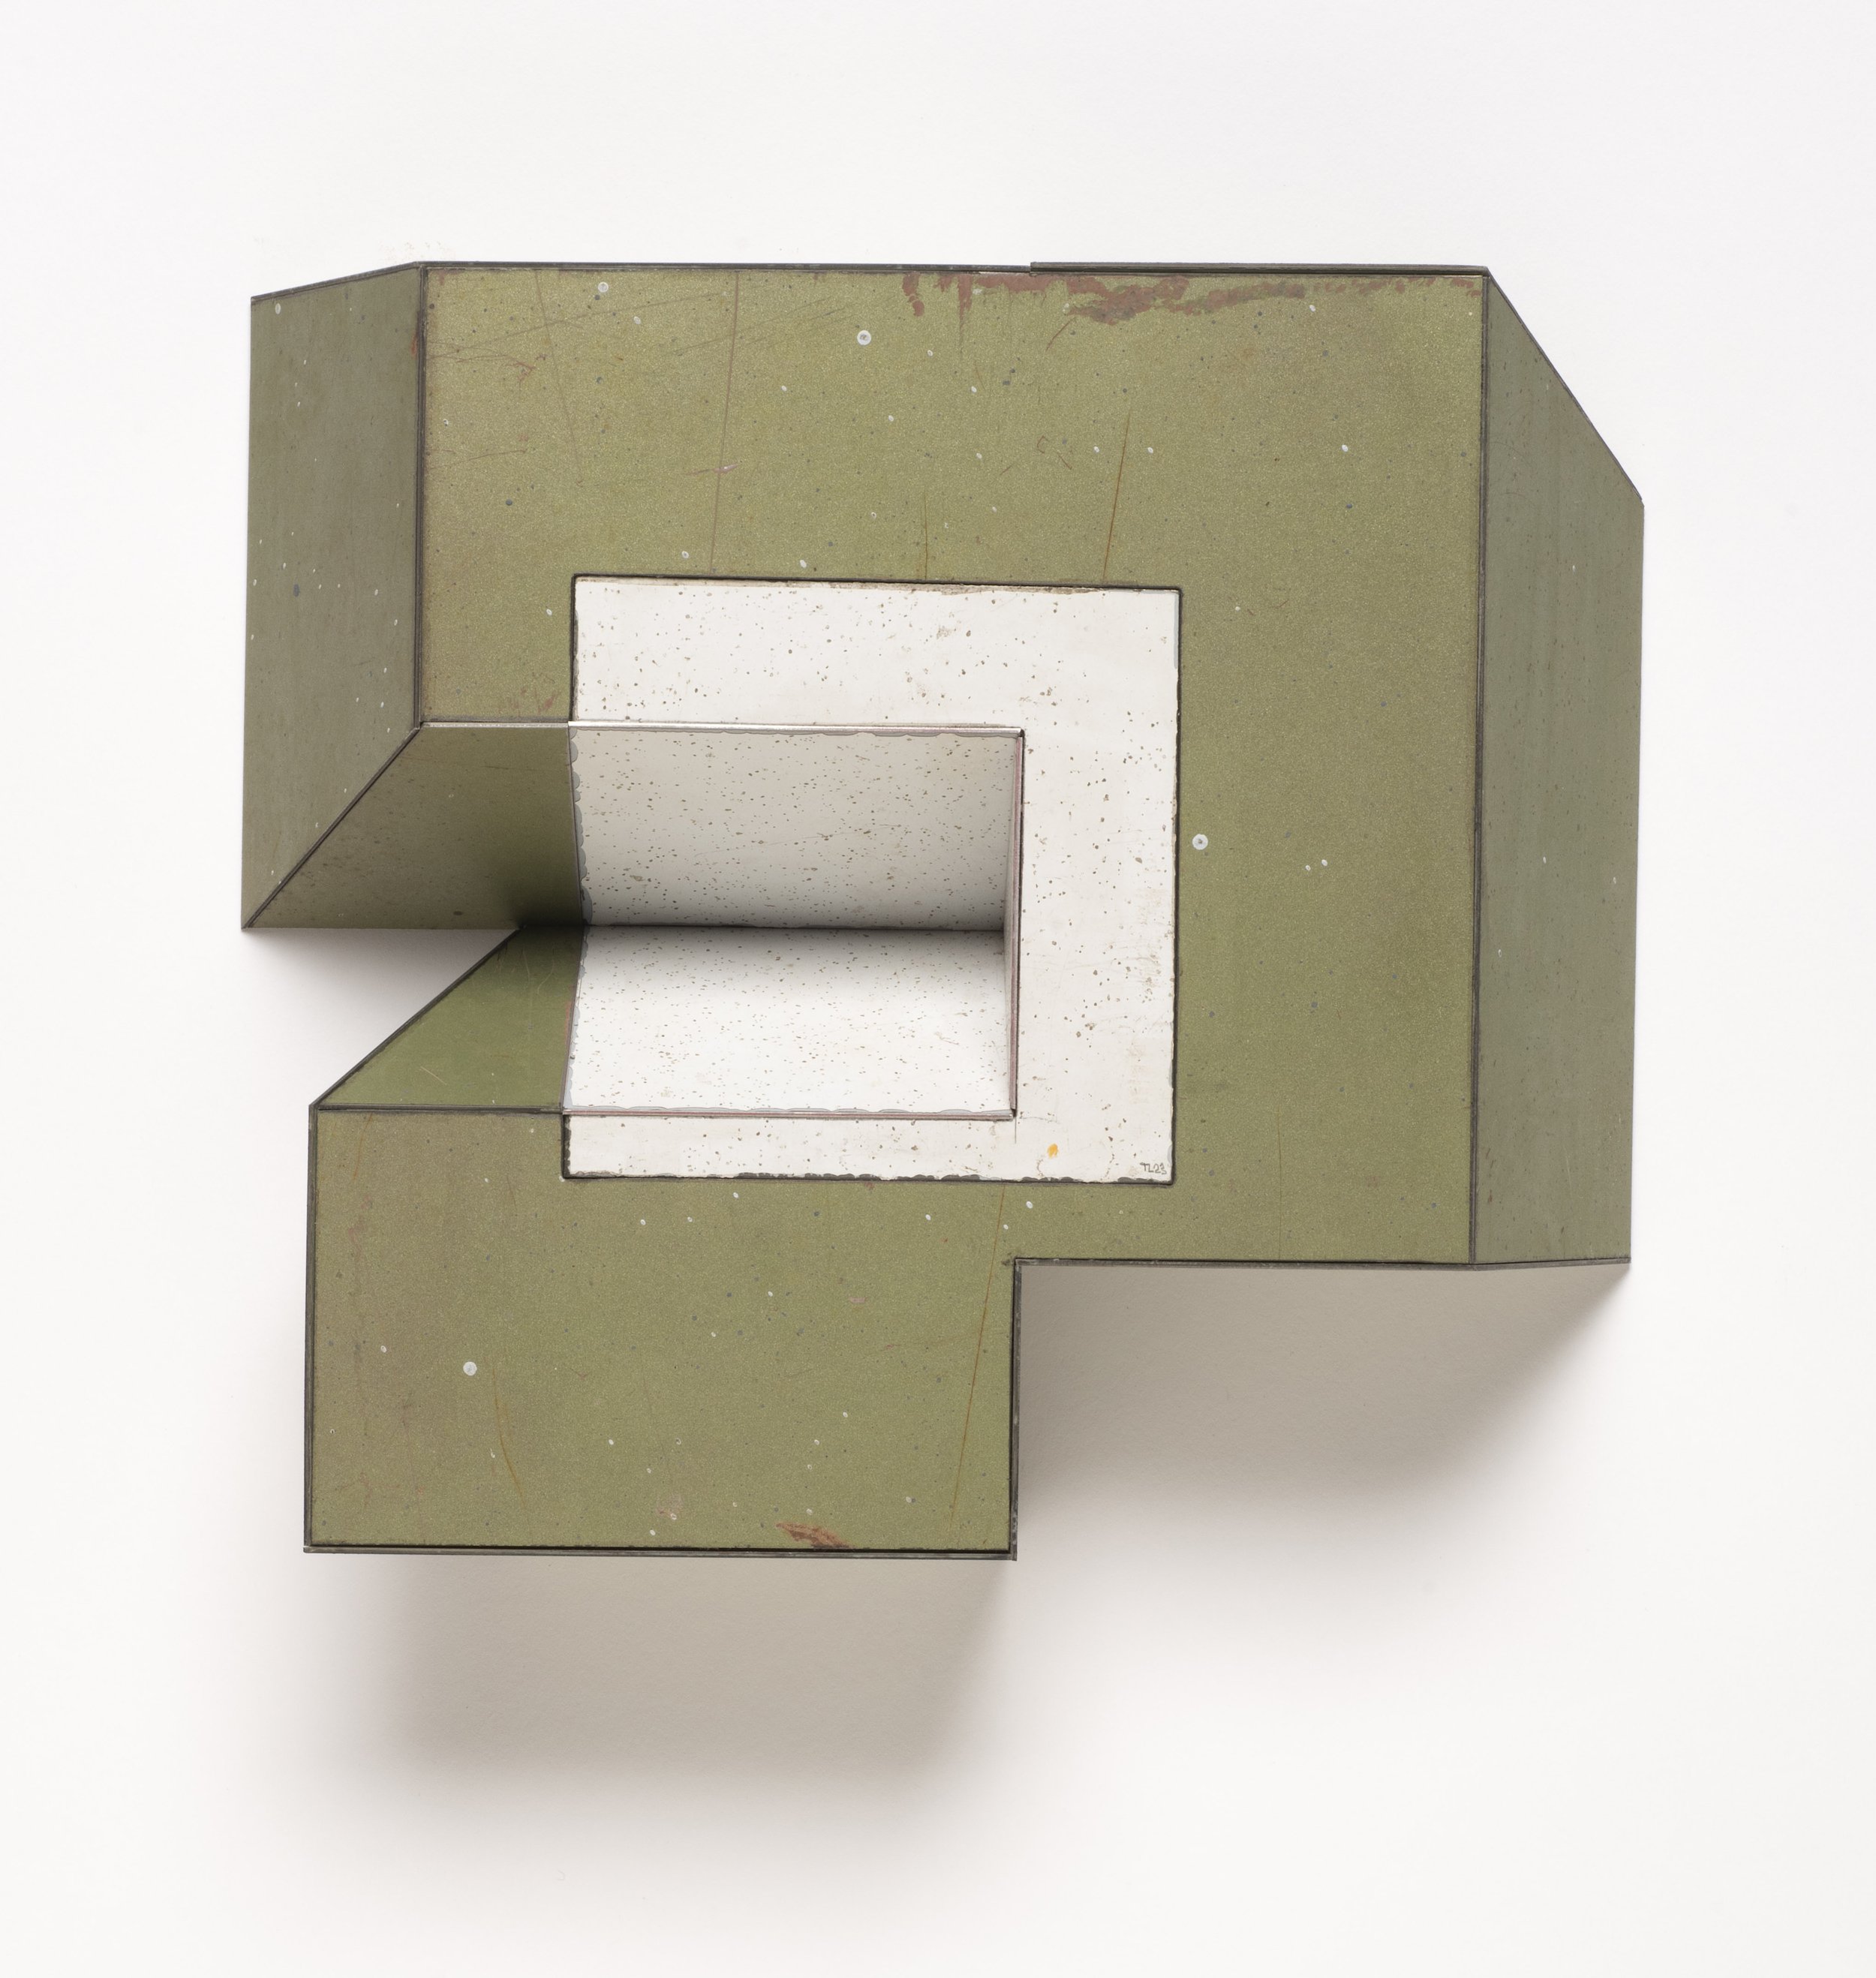  ICY HOT | 8 x 9 1/8 x 2 1/8 inches / 20.3 x 23.4 x 5.8 cm, Salvage Steel, Marine-grade Plywood, Silicone Vulcanized Rubber, Hardware, 2022 